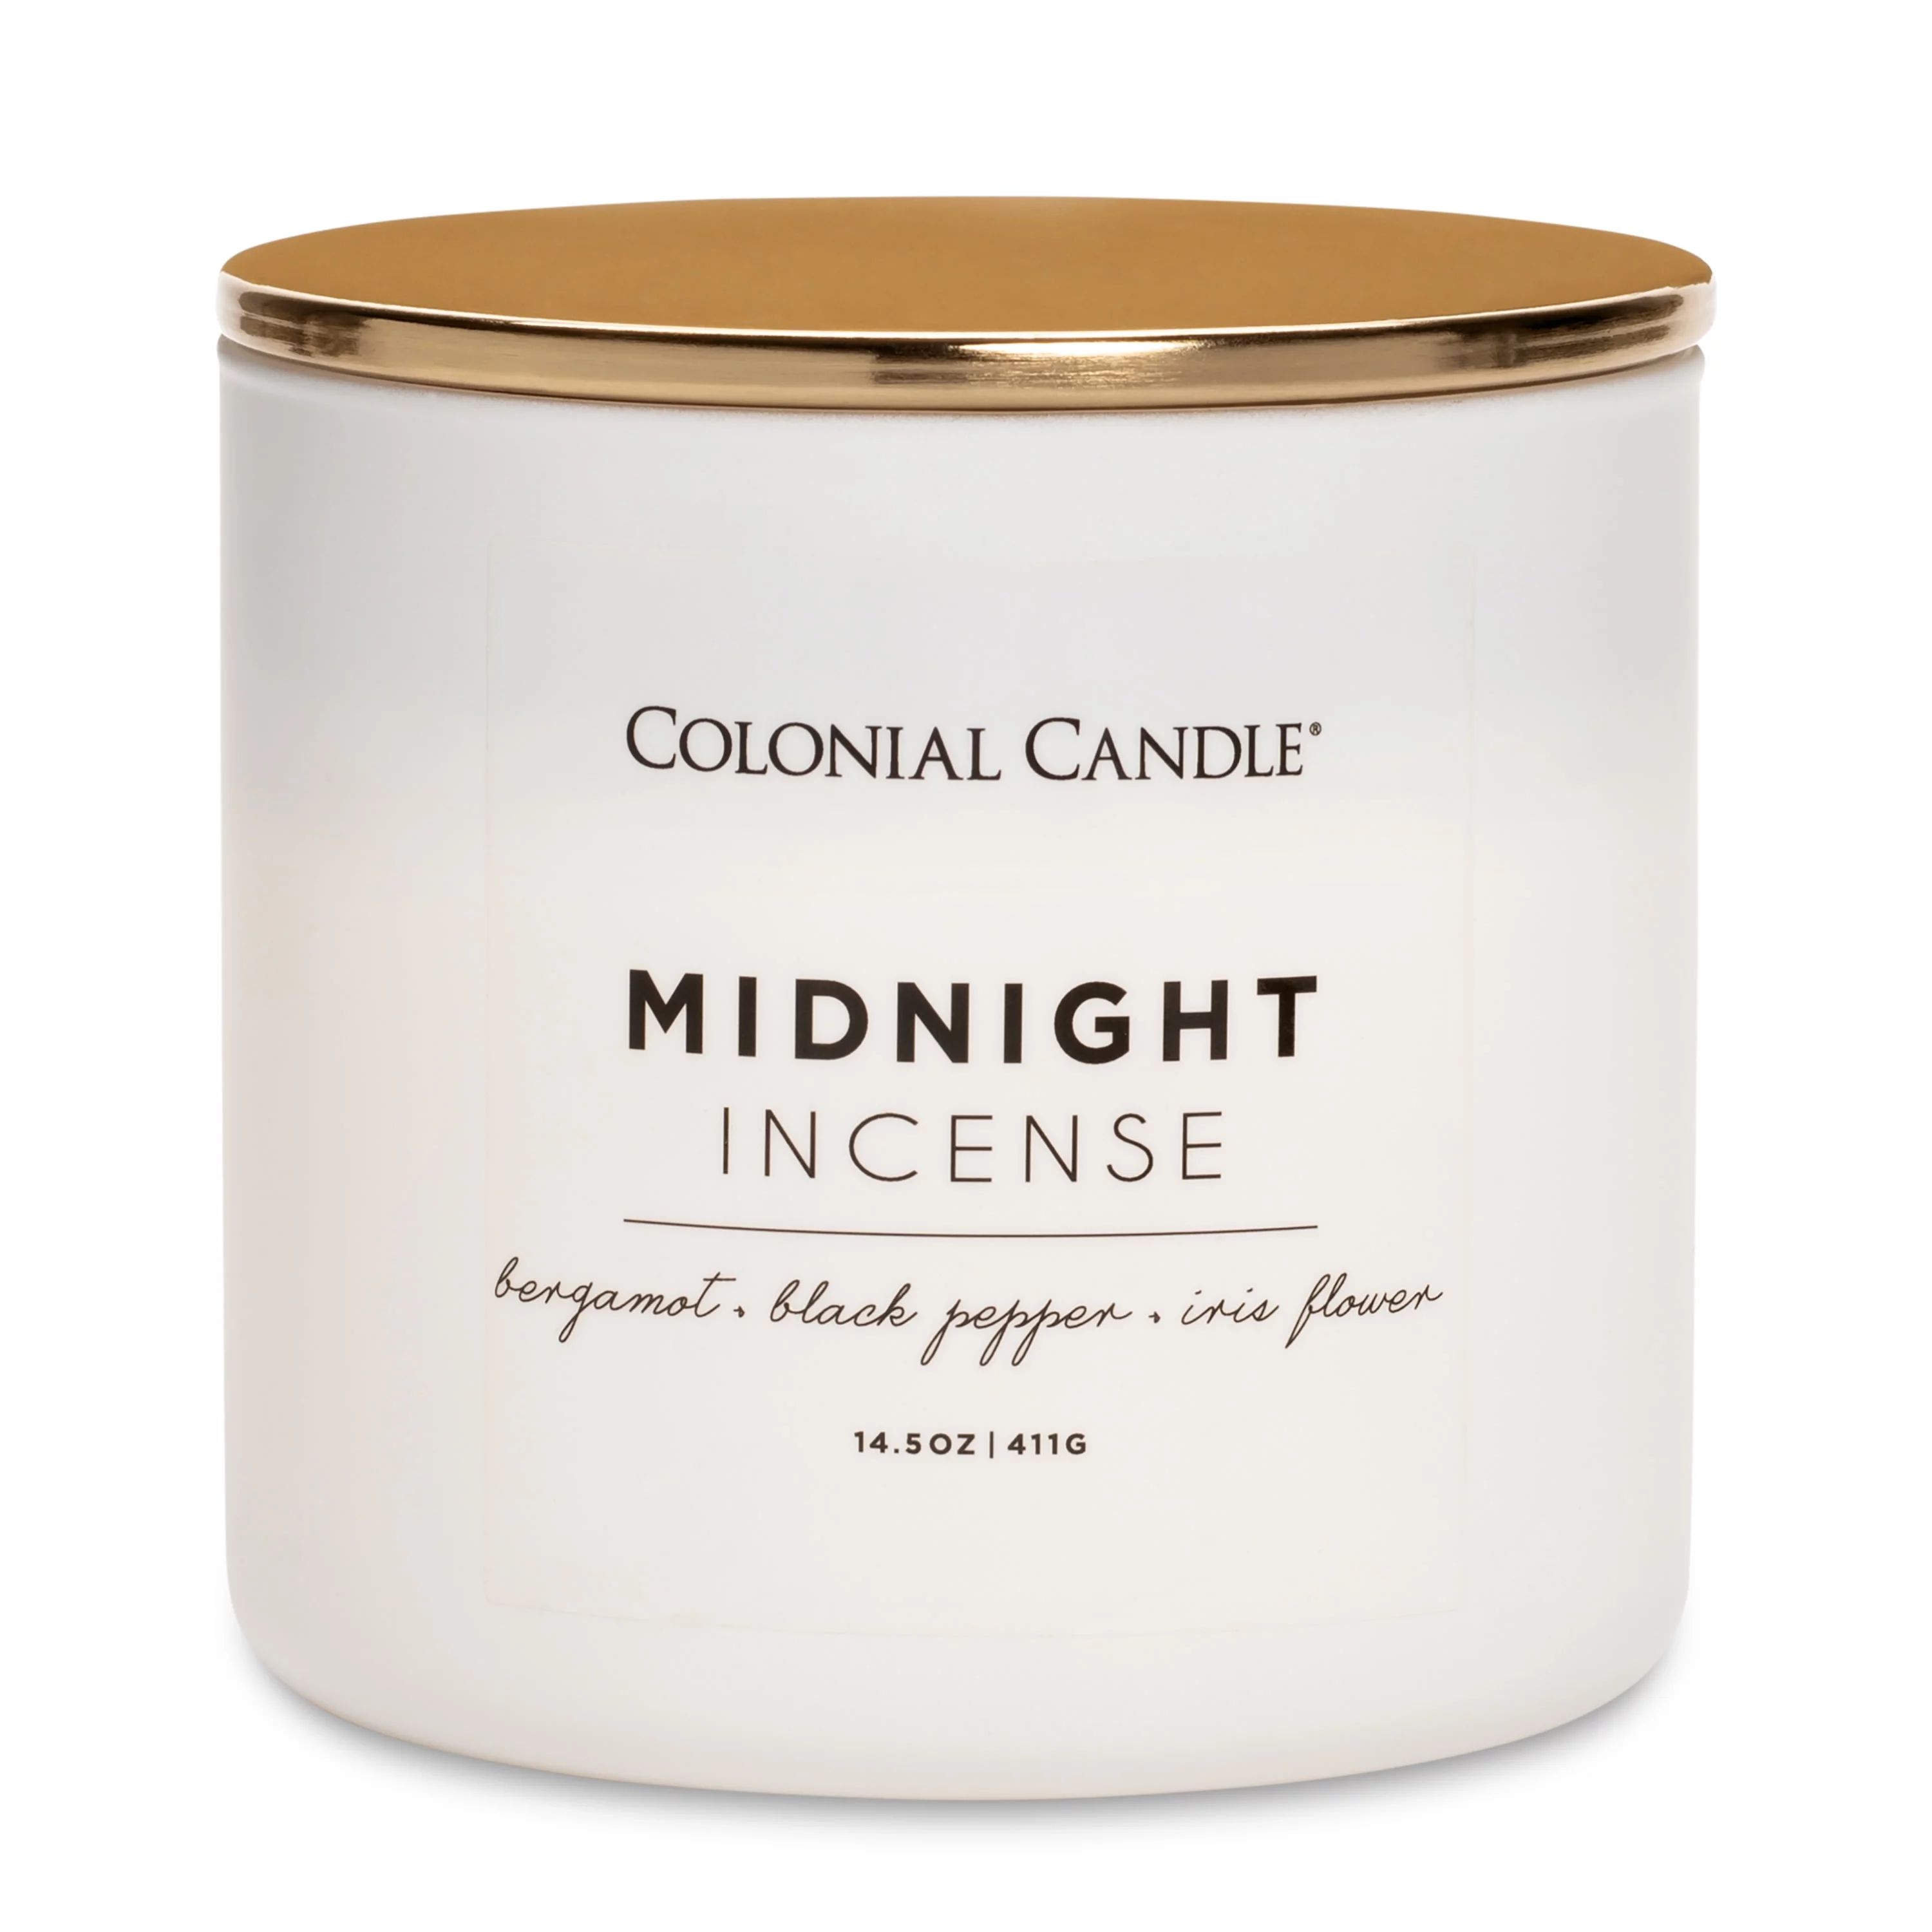 Colonial Candle Midnight Incense 14.5oz 3 Wick Candle, White | Walmart (US)